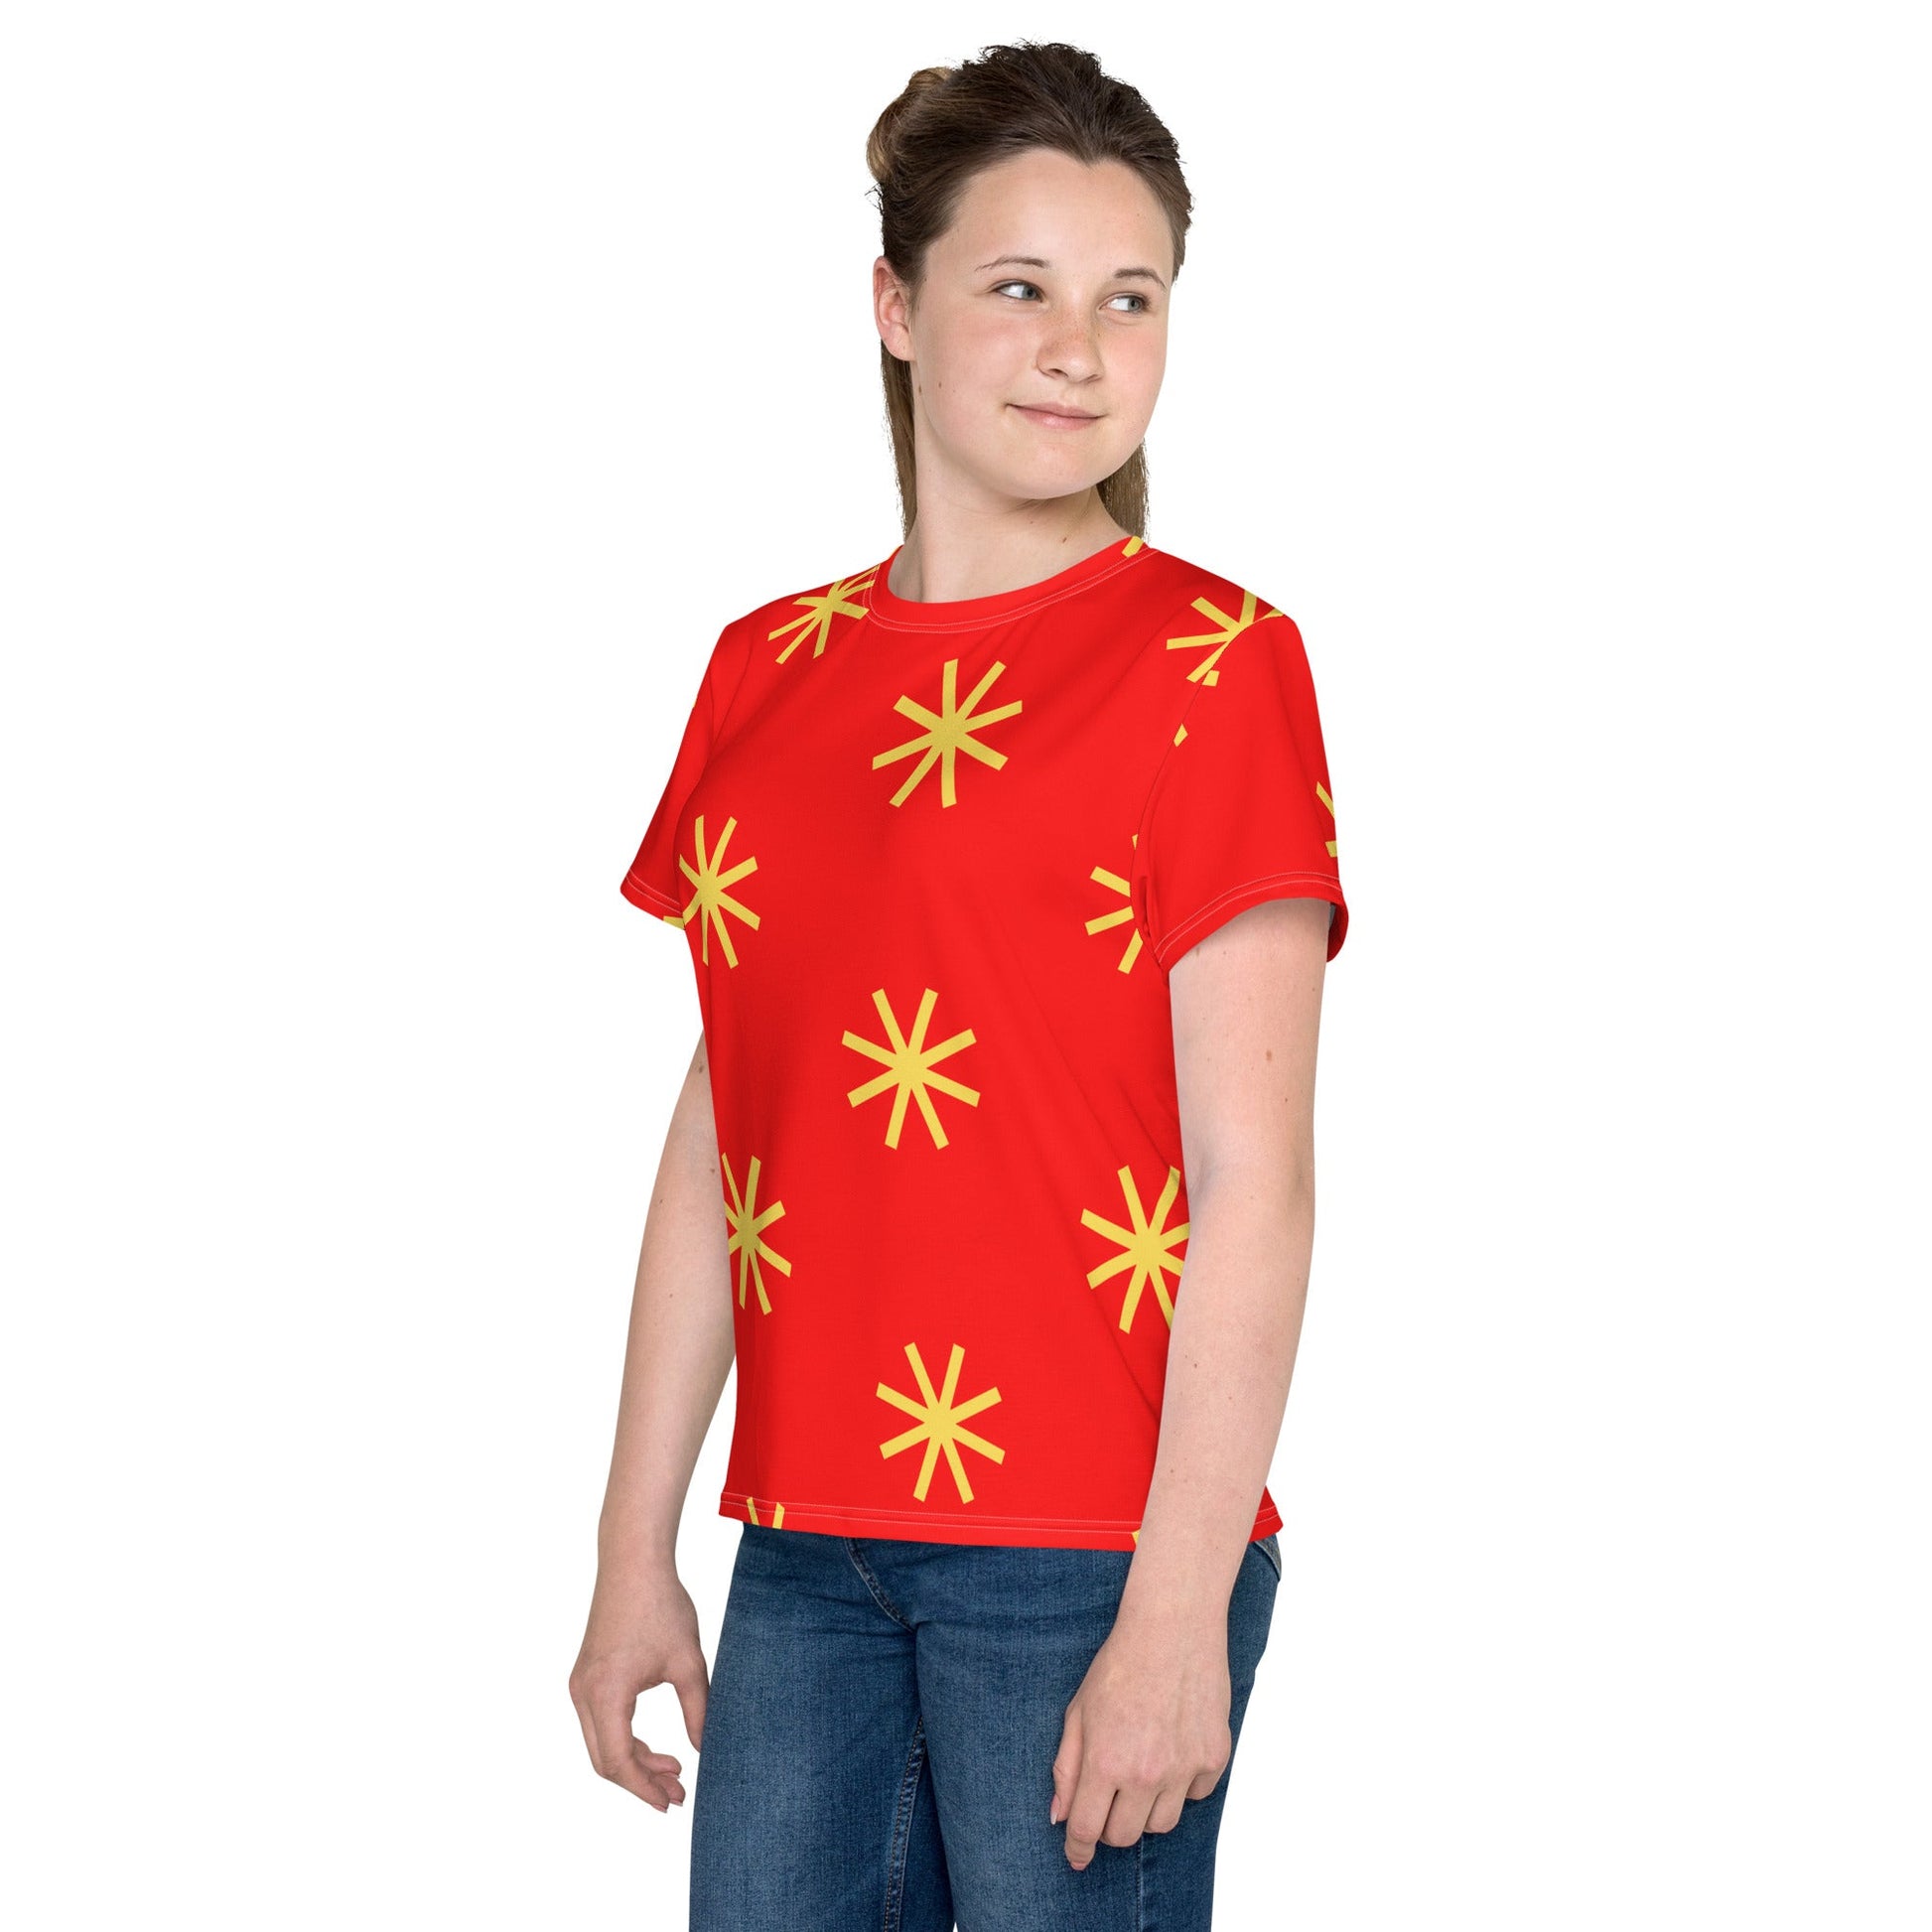 The Chip Youth crew neck t-shirt castaway caychip and dalechip costume#tag4##tag5##tag6#